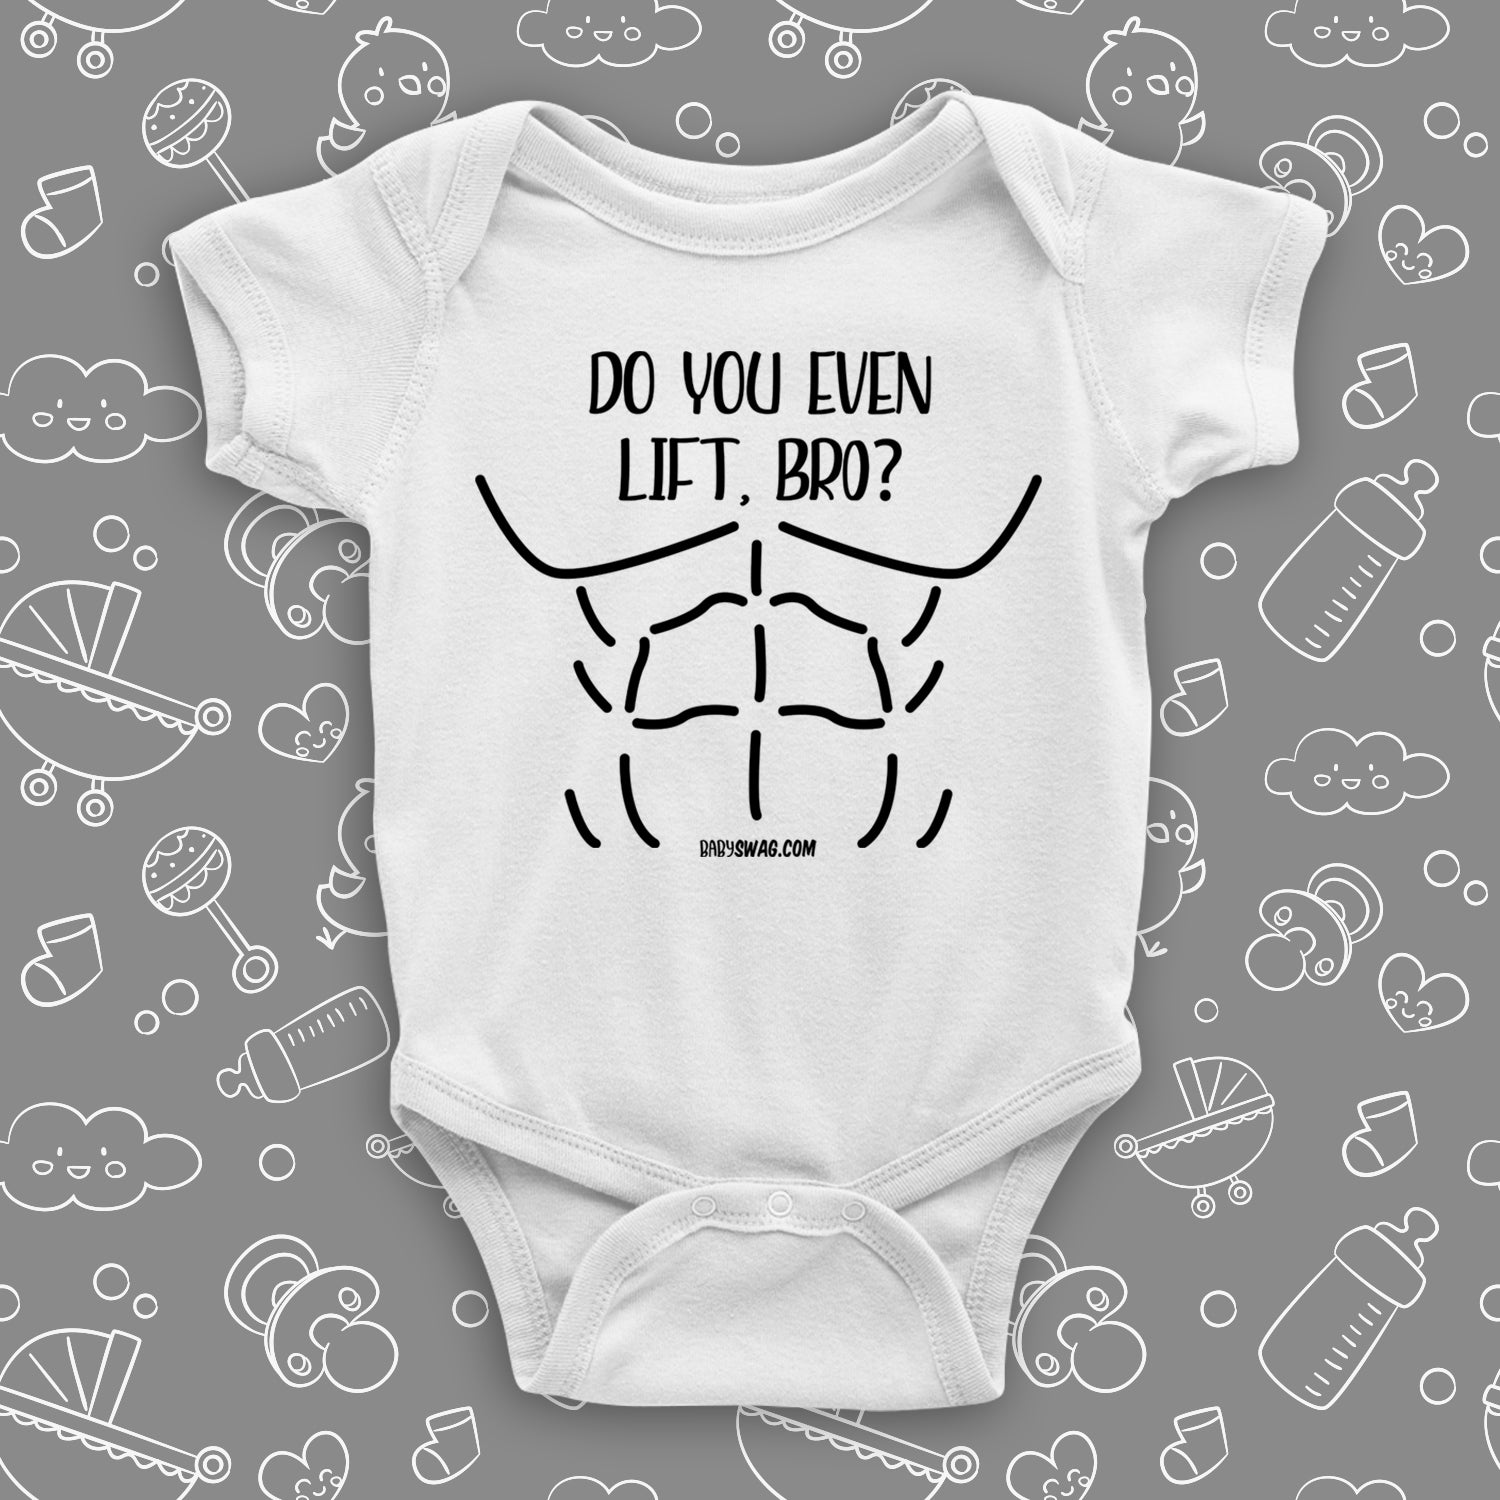 Funny baby boy onesie with saying "Do You Even Lift Bro?" in white.